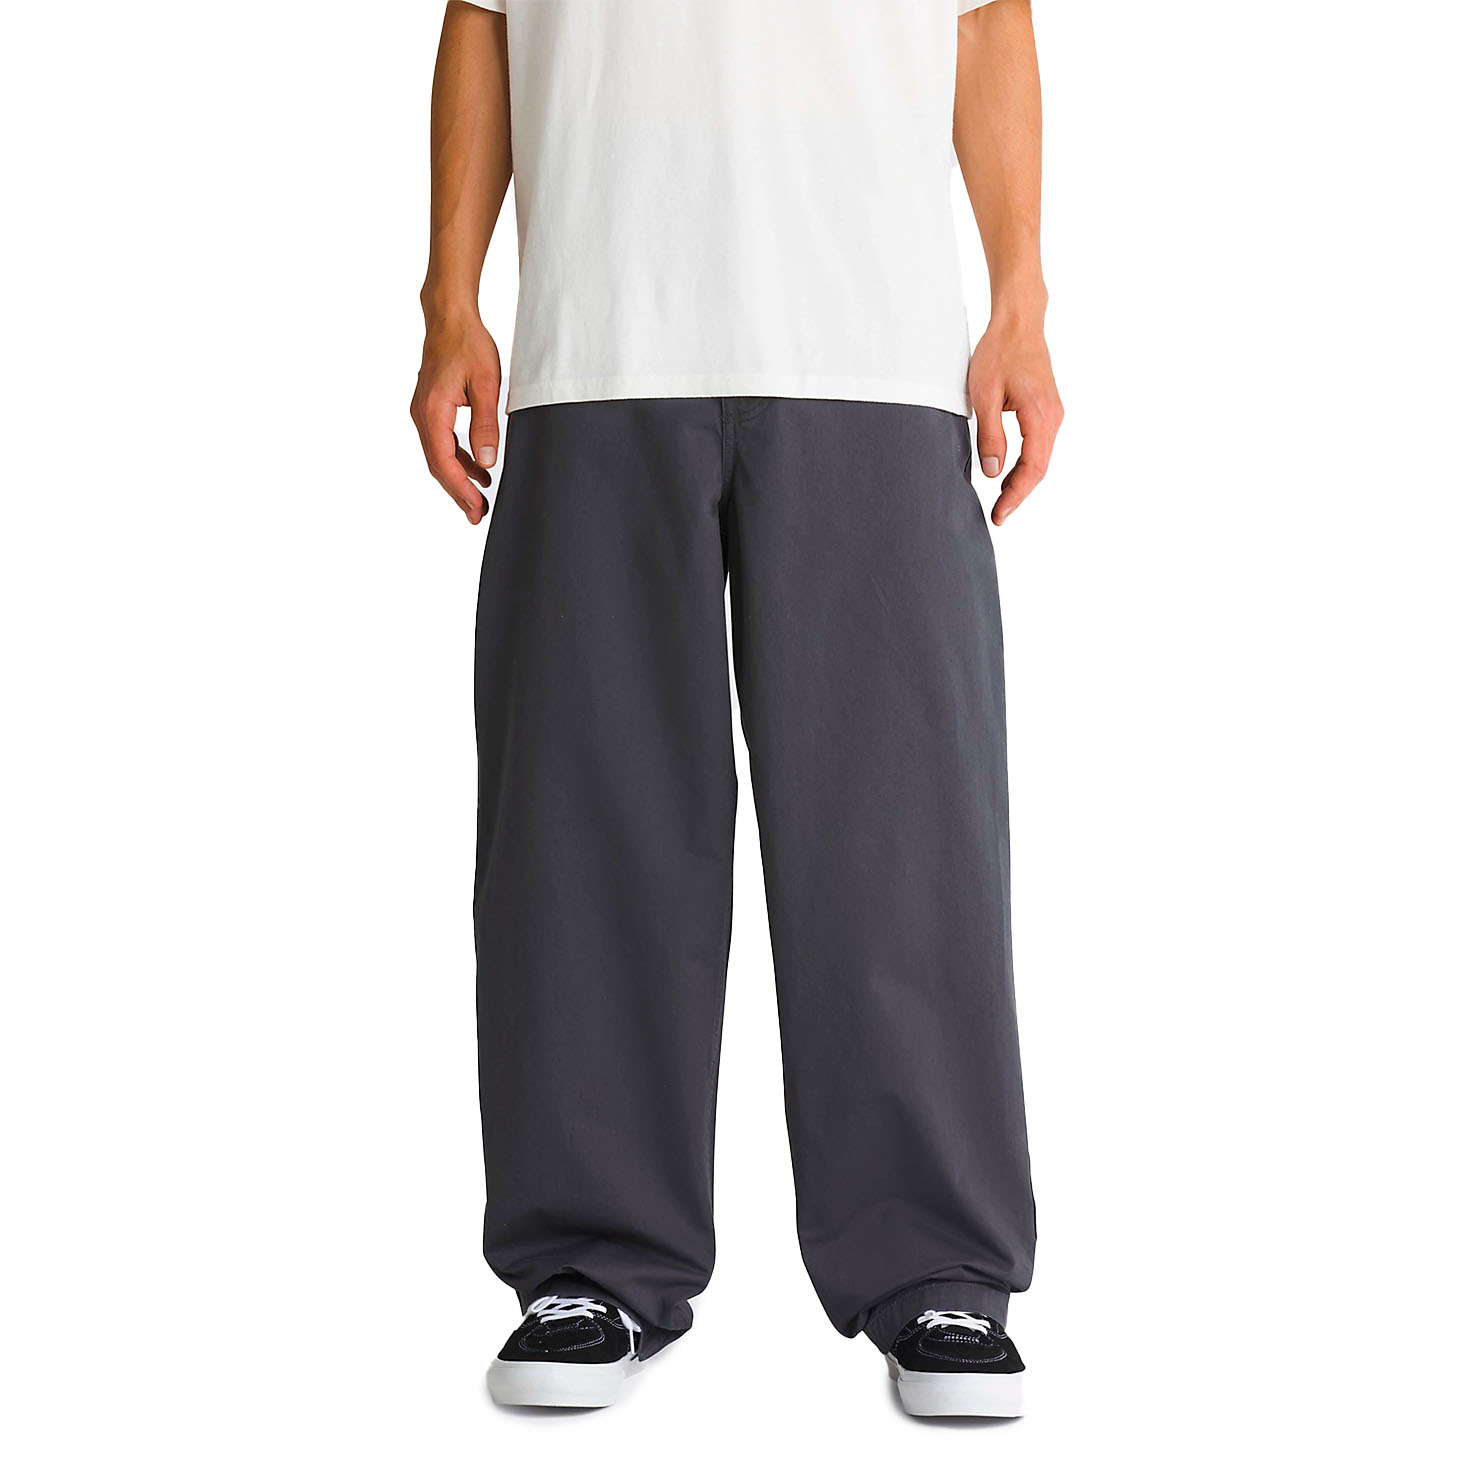 AUTHENTIC CHINO BAGGY PANTS